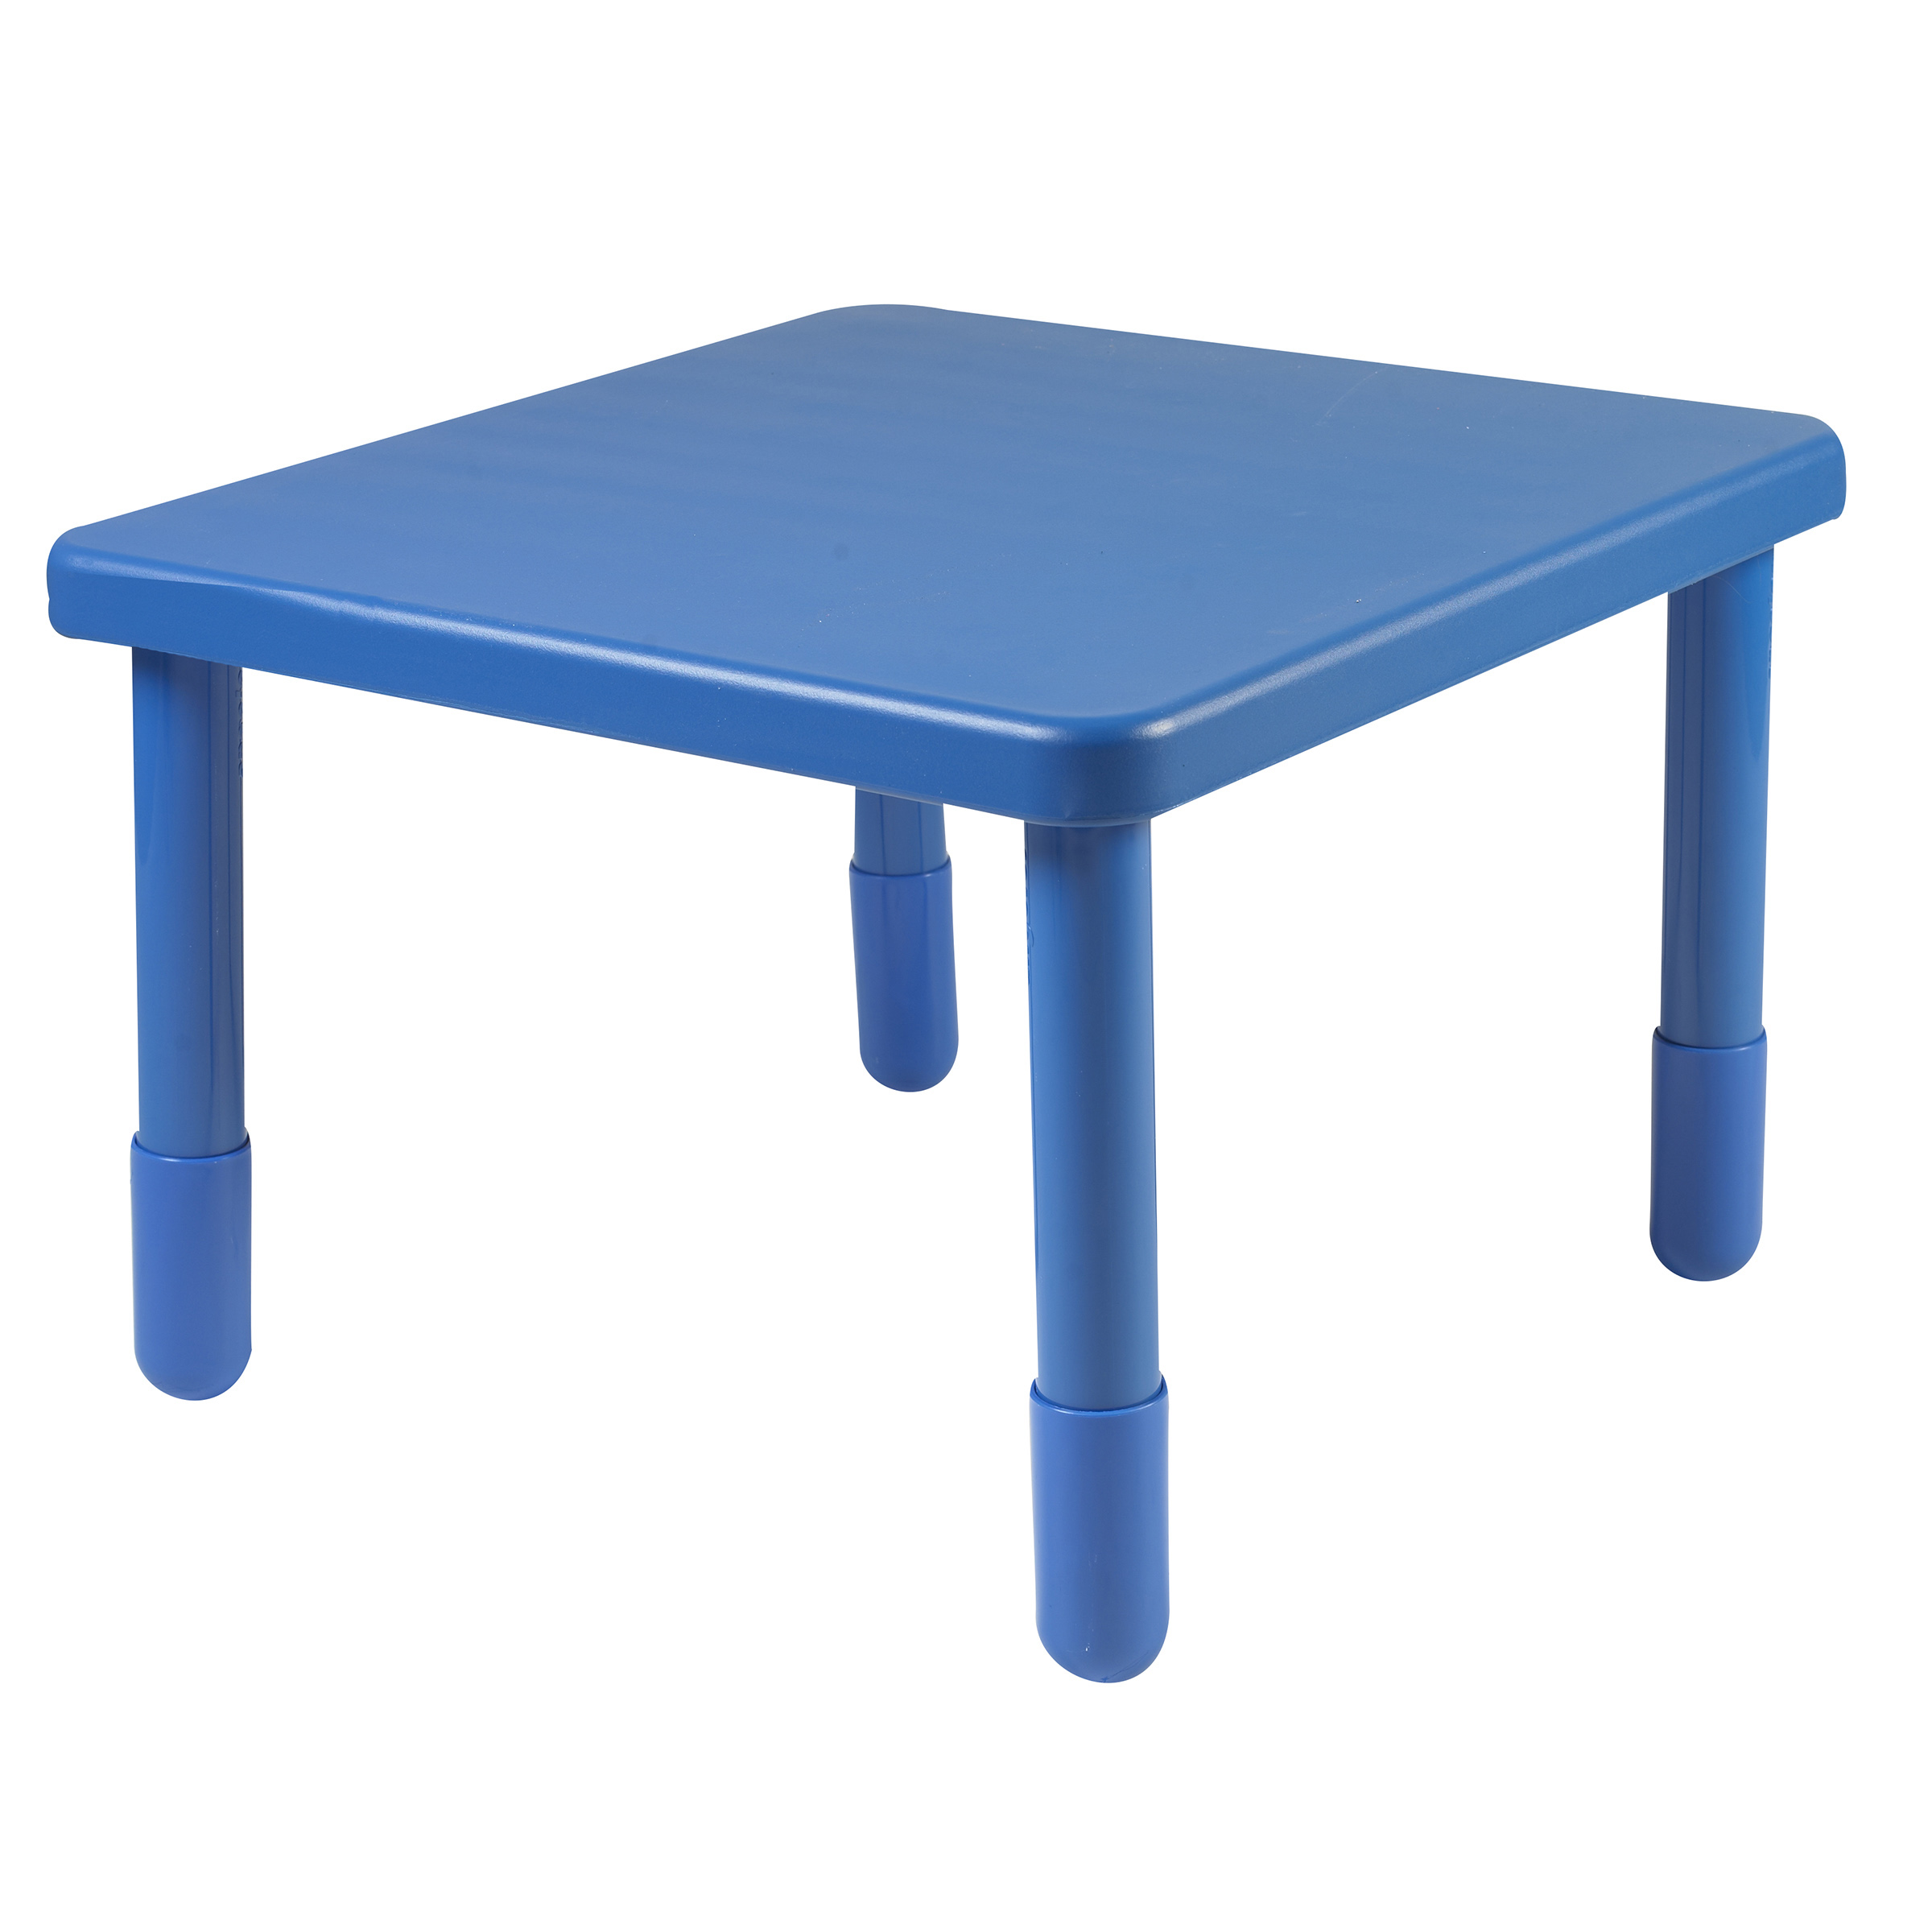 Value 71 cm  Square Table - Royal Blue with 51 cm  Legs